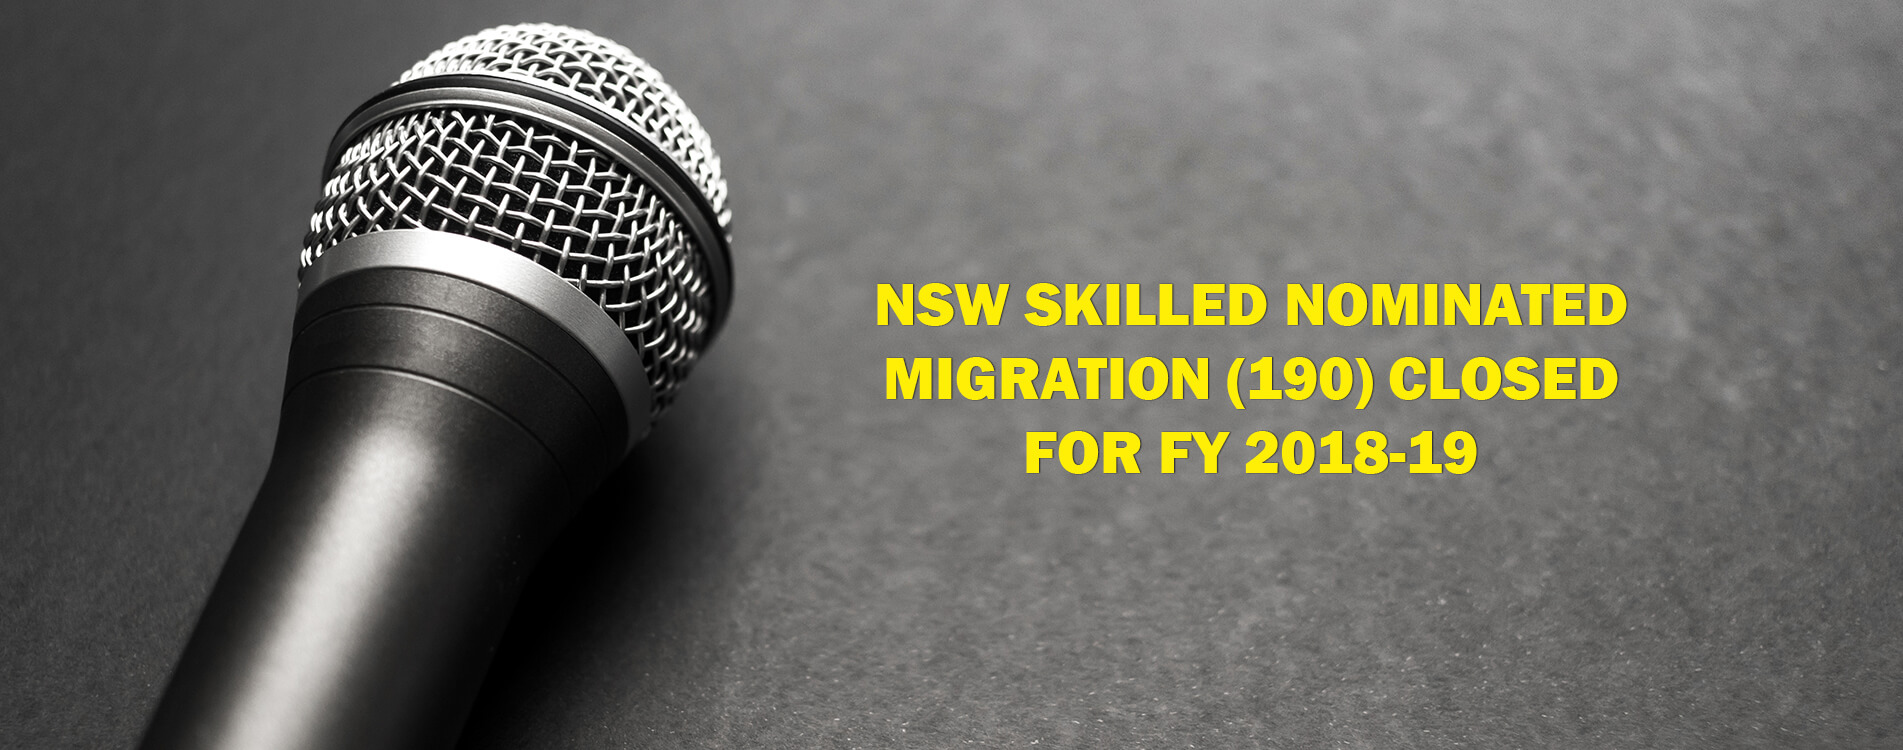 NSW Skilled Nominated Migration 190 Closed for FY 2018-19